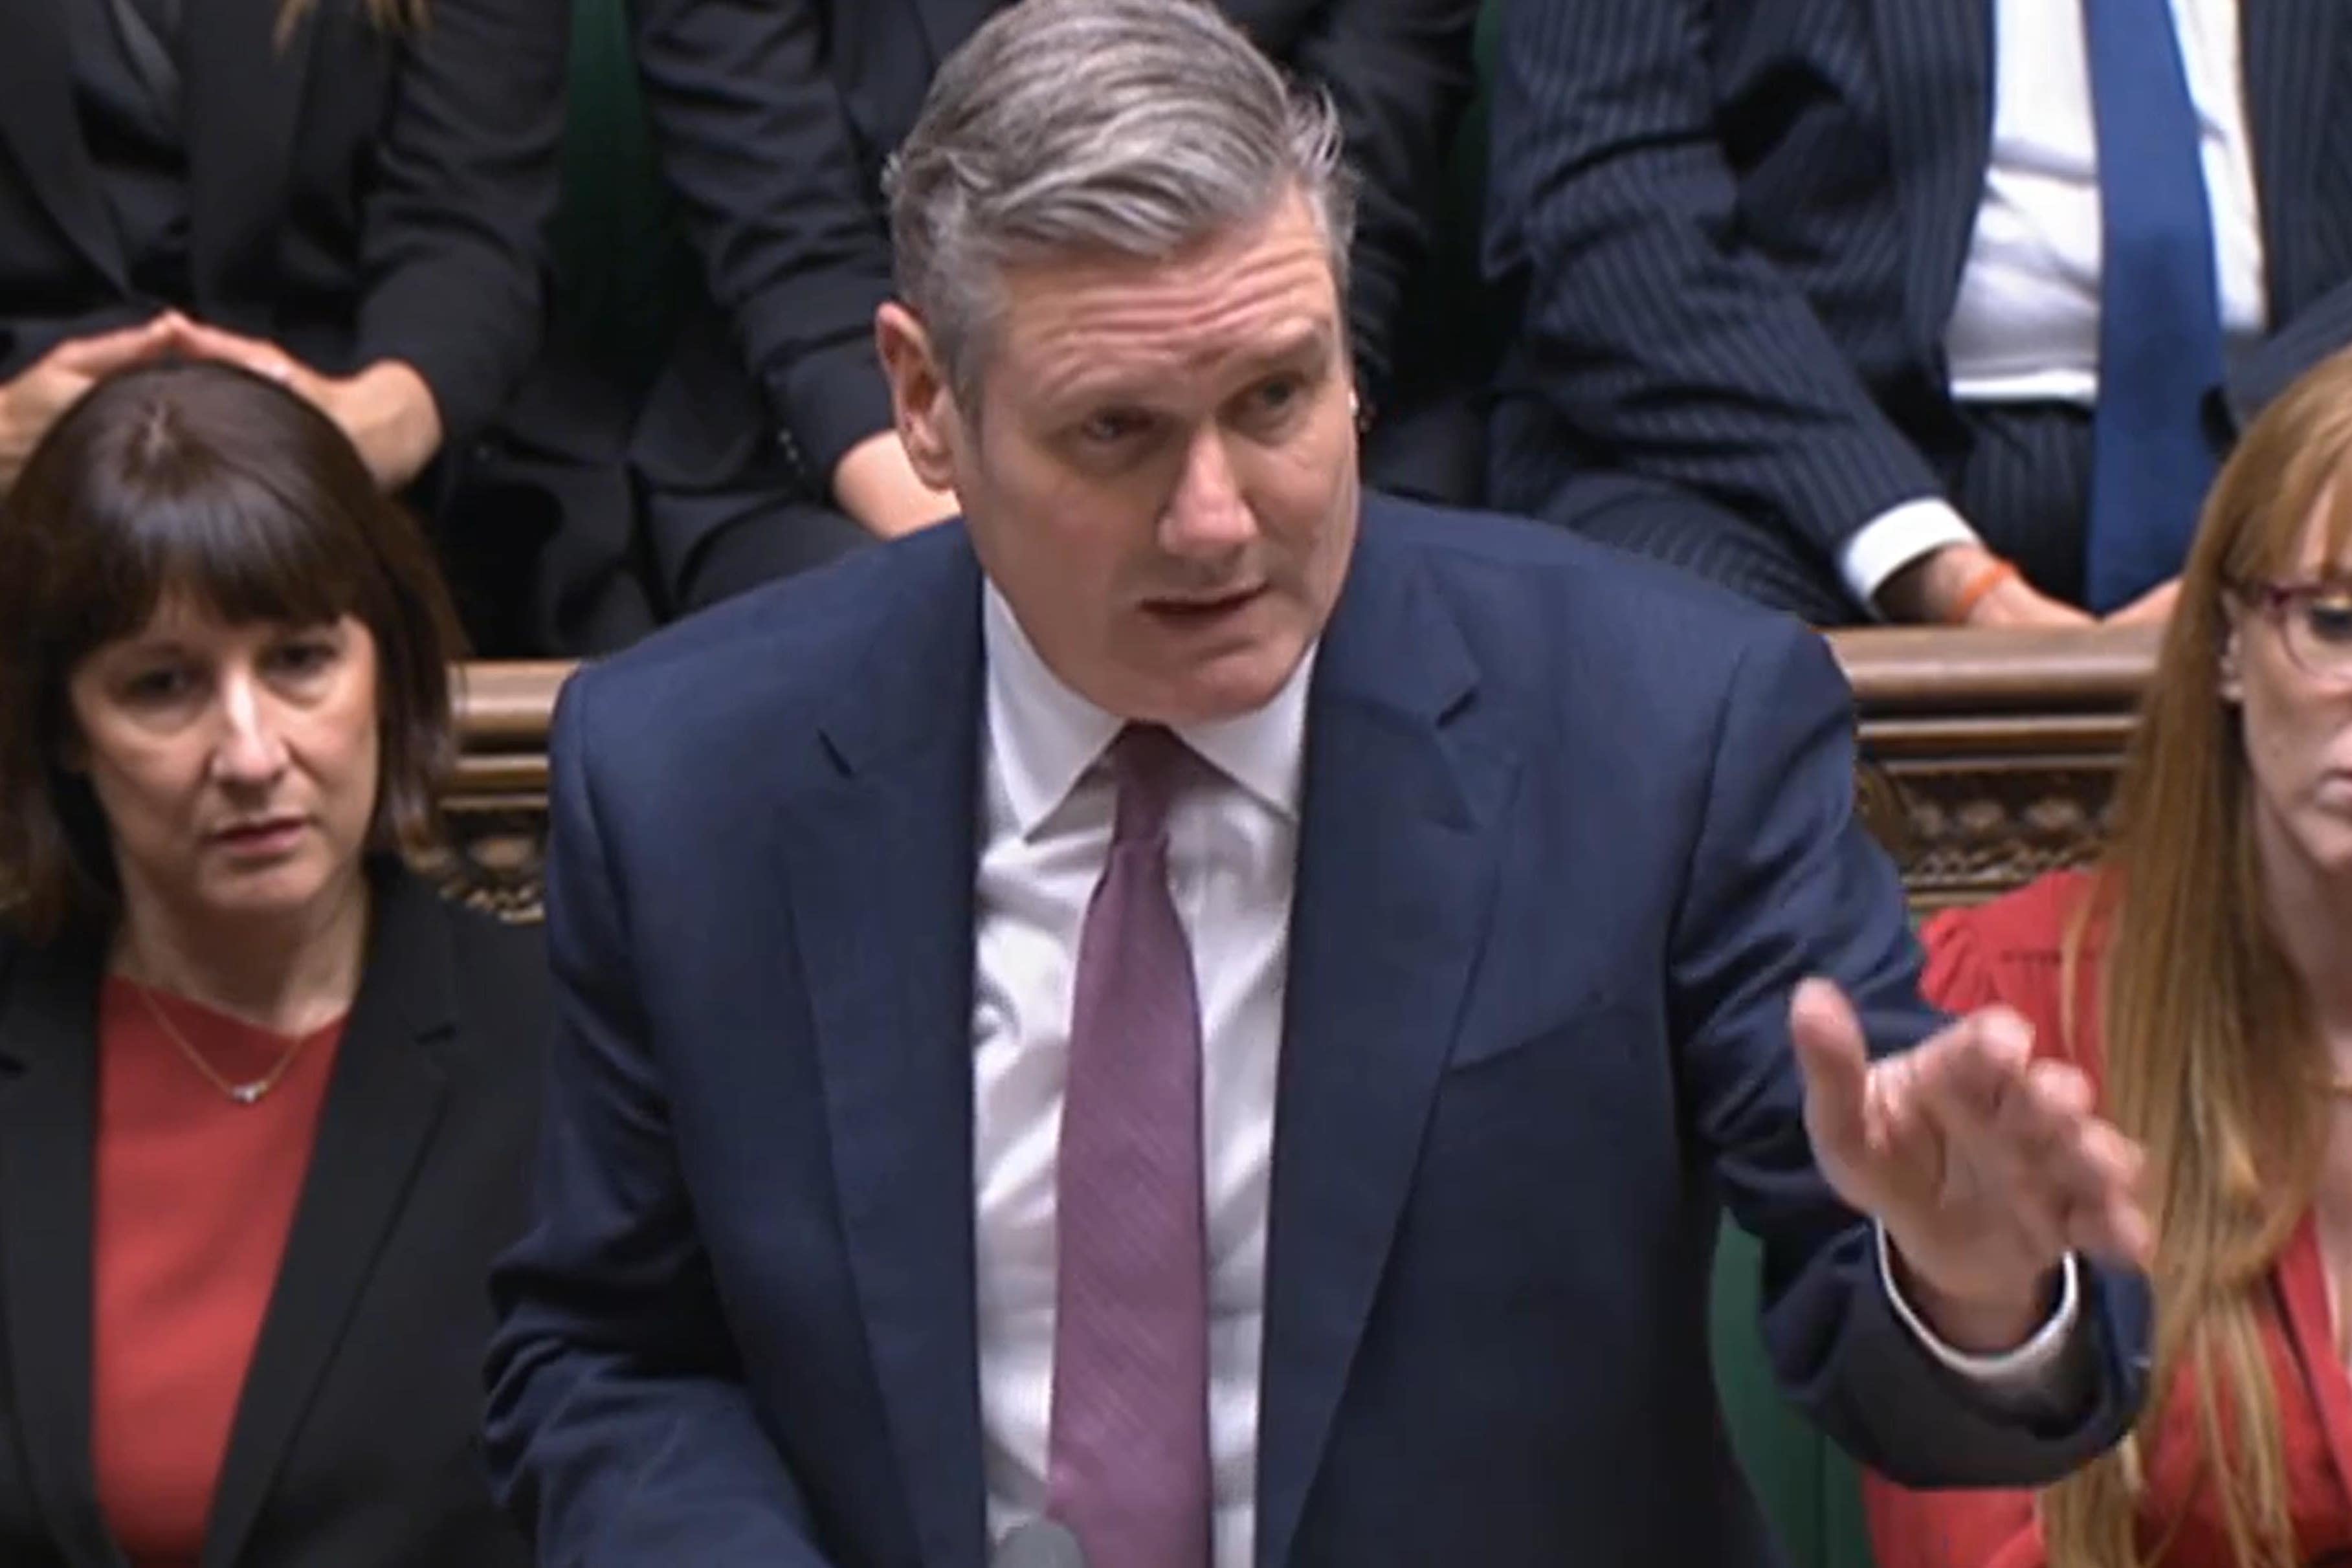 Sir Keir Starmer has called for longer humanitarian pauses, rather than a ceasefire